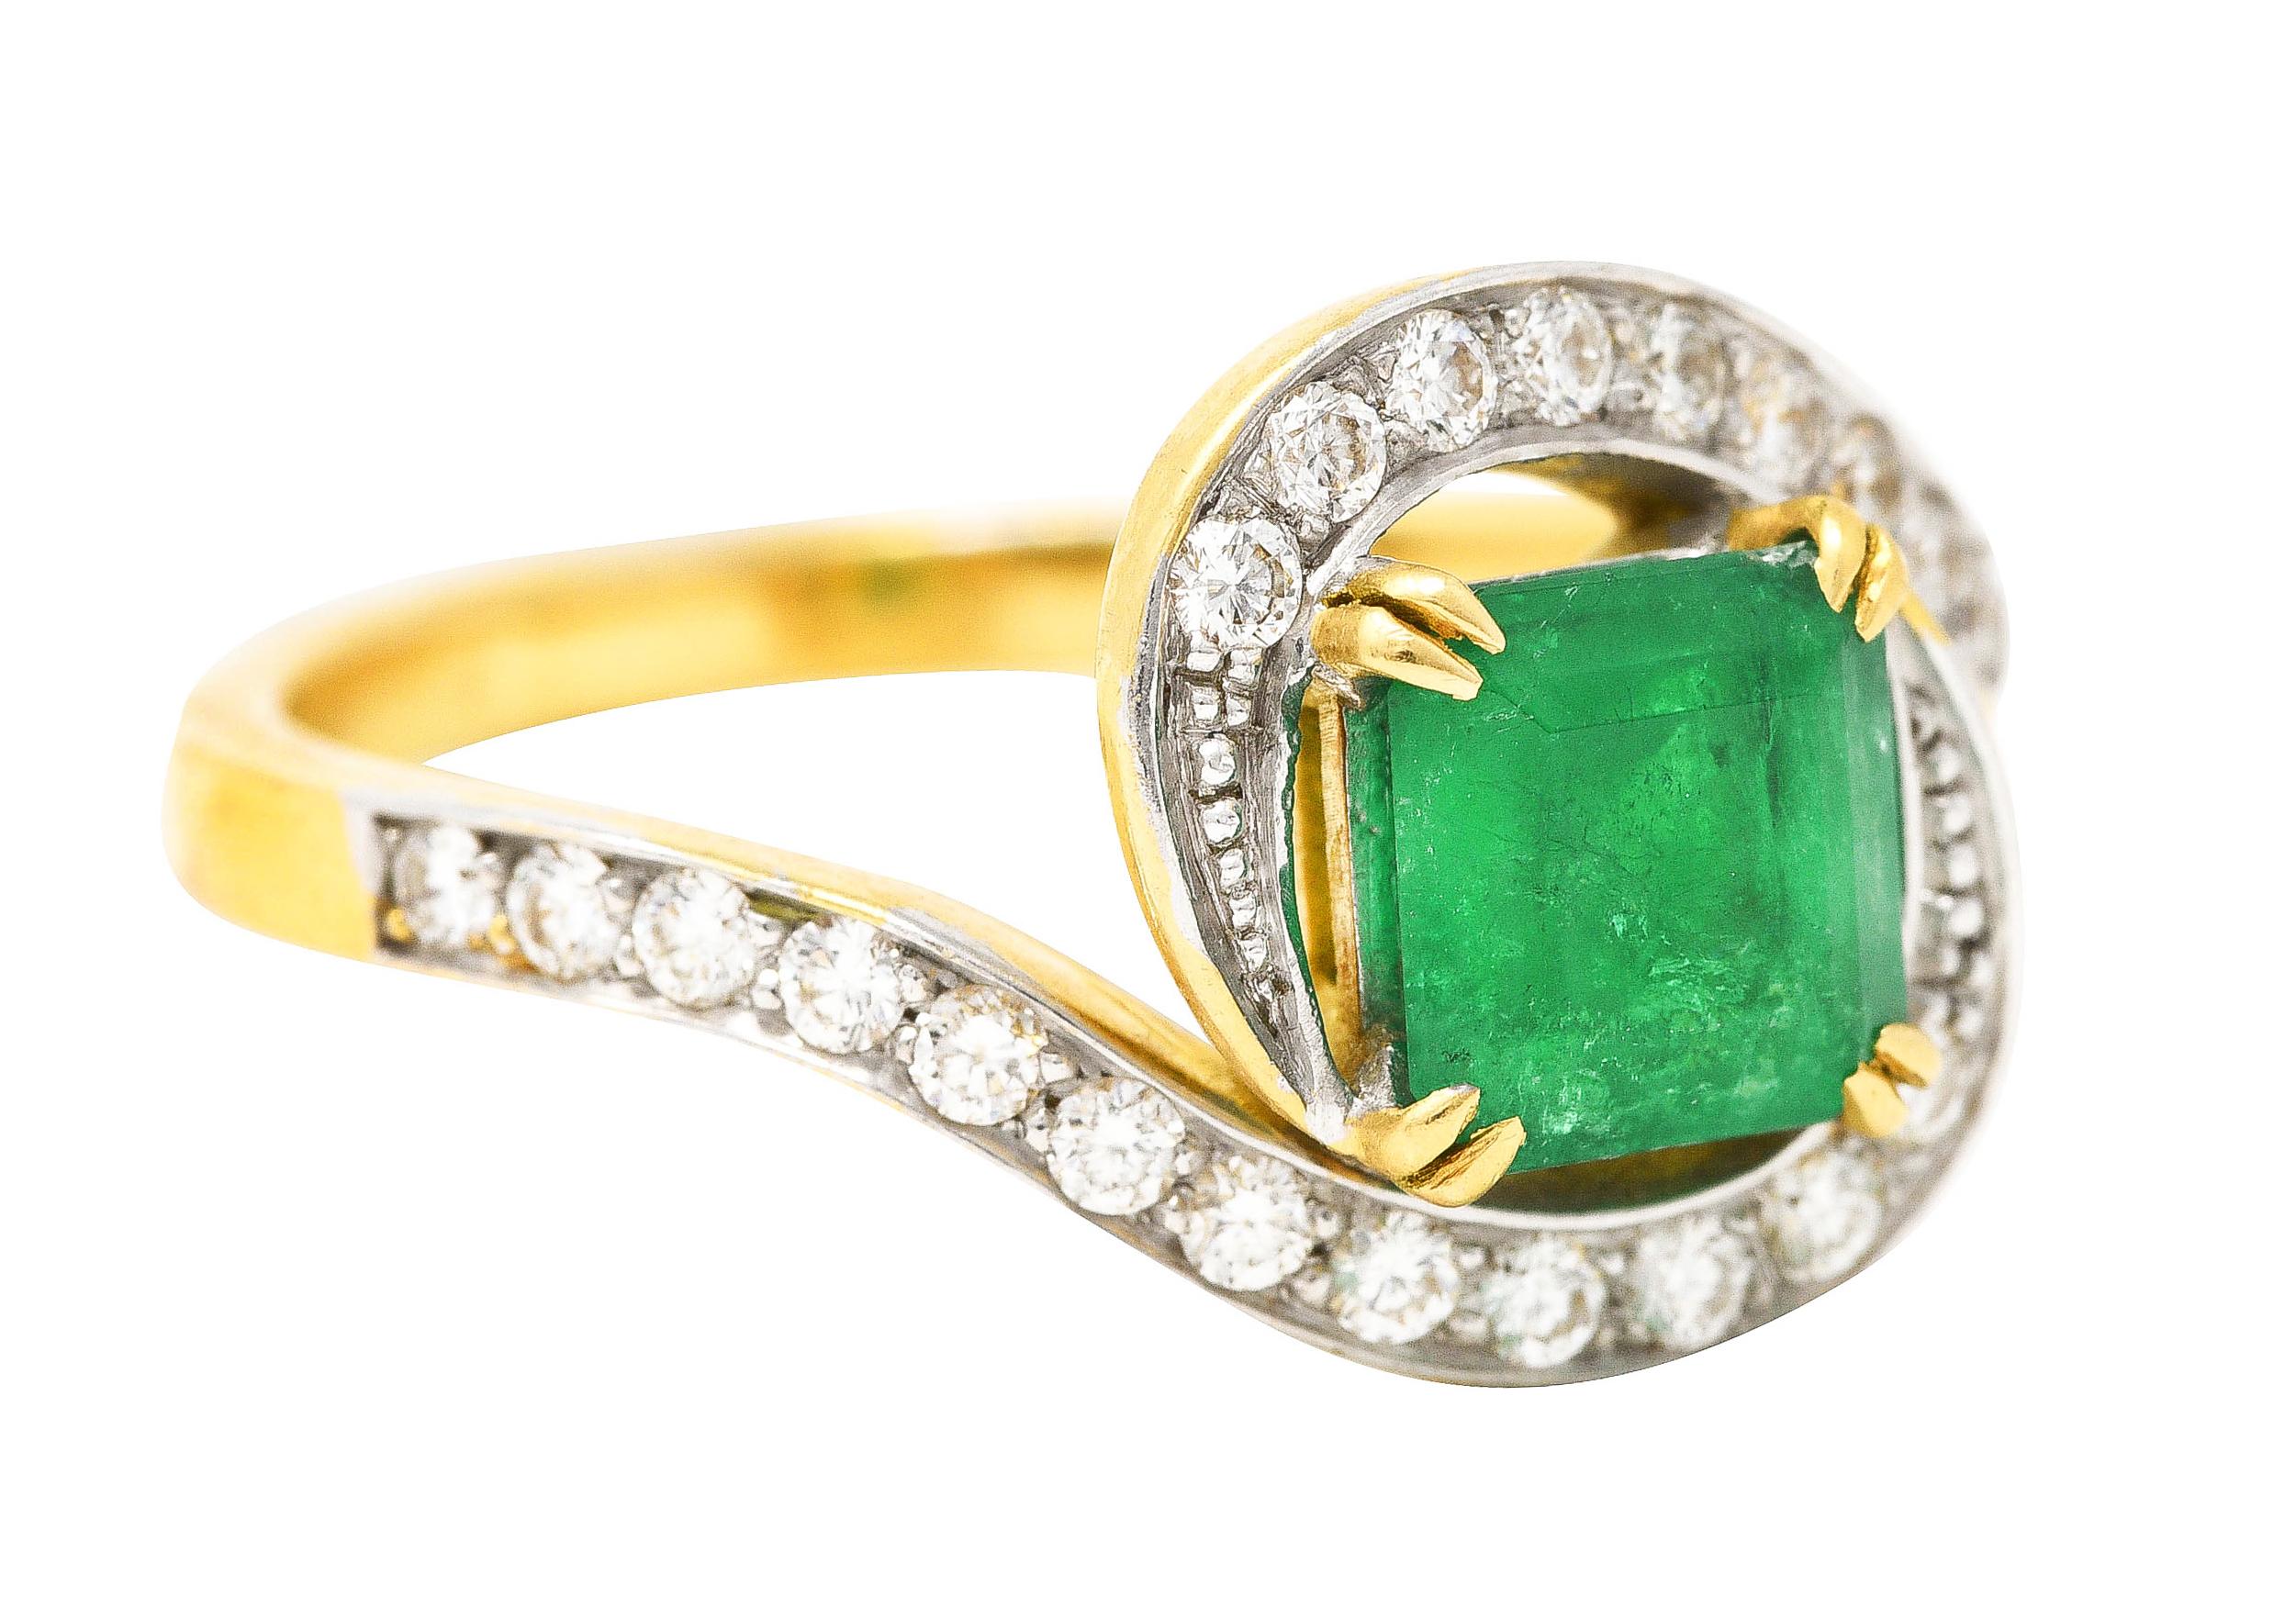 Featuring an emerald cut emerald weighing approximately 1.07 carats

Bright and uniformly green in color and translucent with natural inclusions

Basket set with split prongs and surrounded by scrolling bypass shoulders

Accented by round brilliant